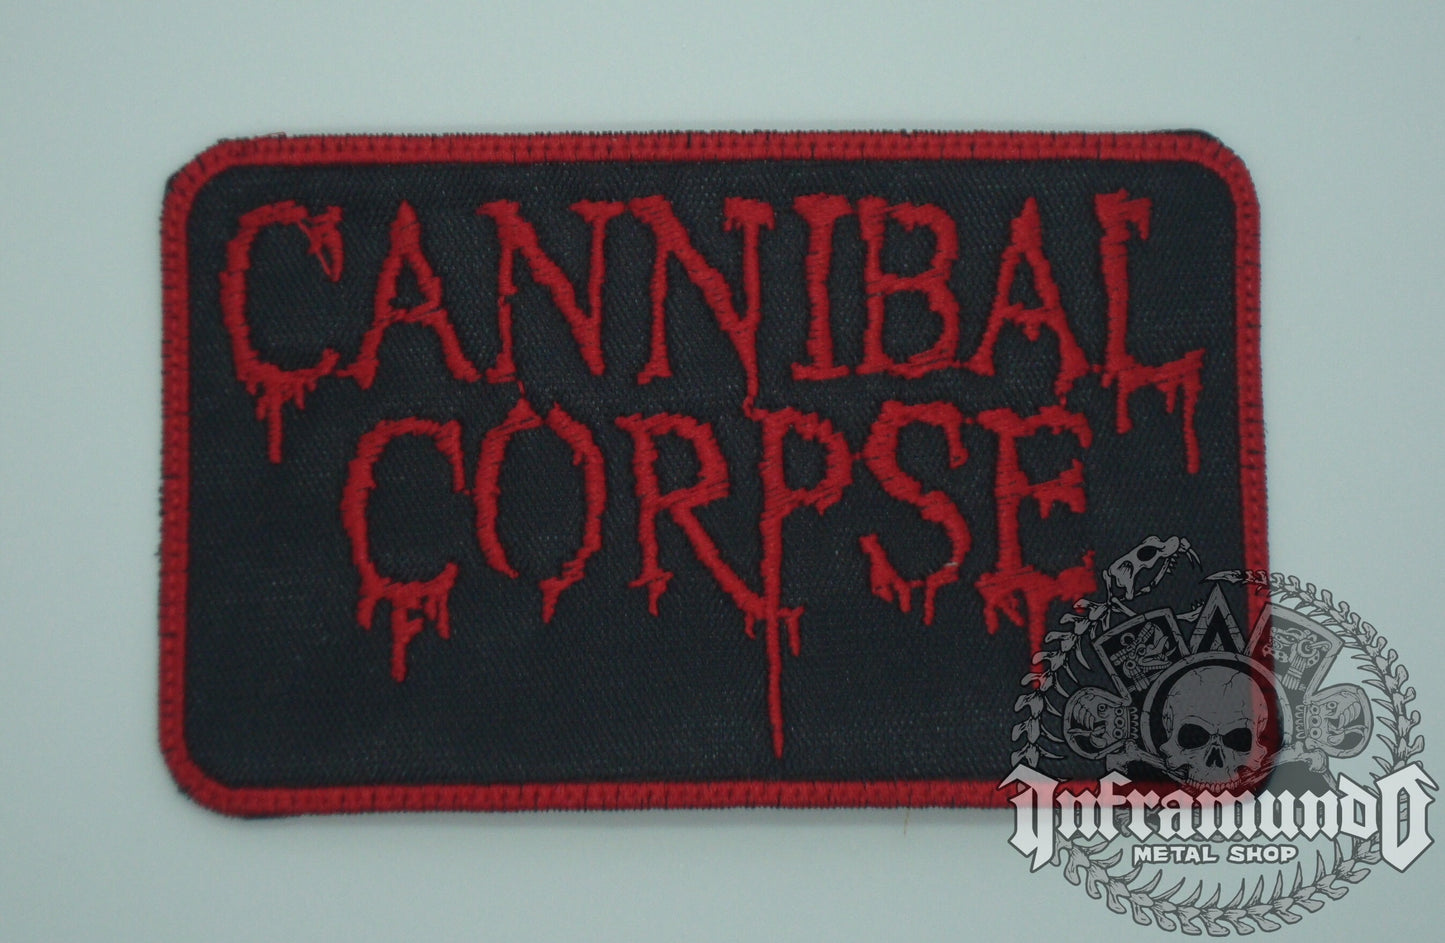 Cannibal Corpse Logo (Embroidered Patch)